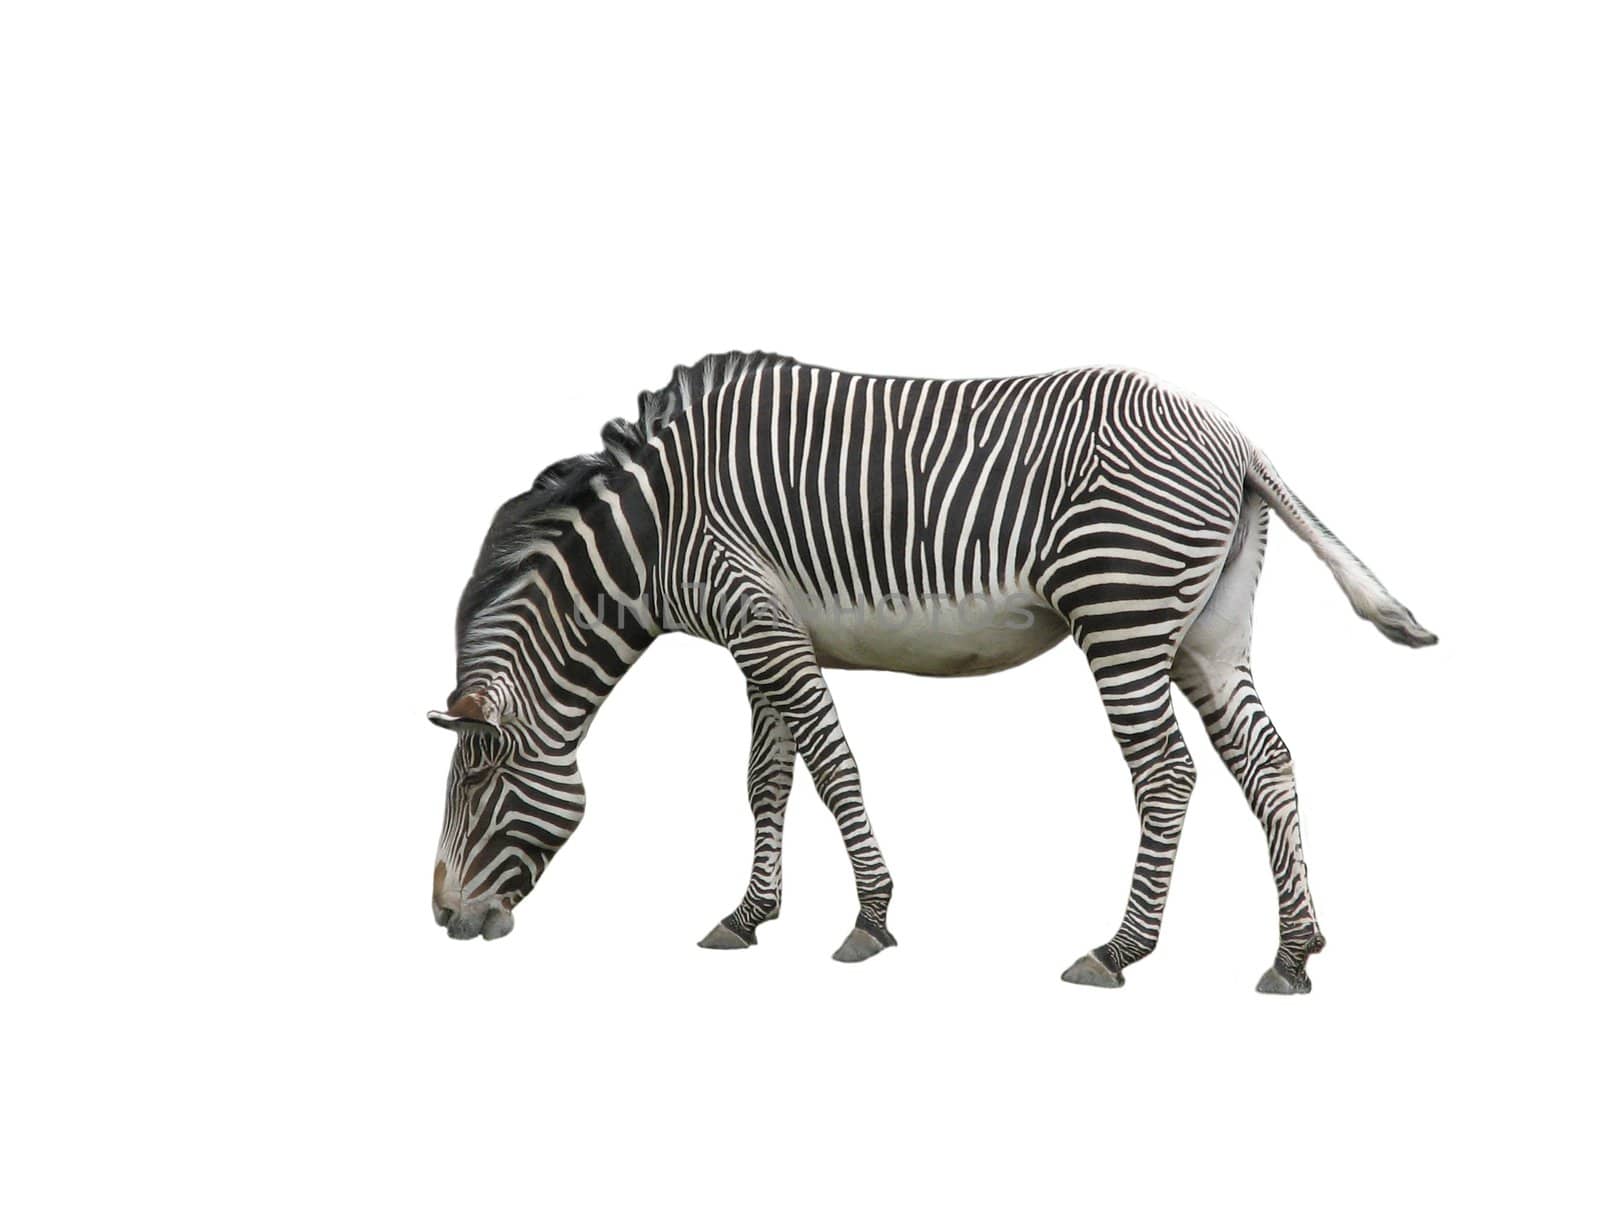 An isolated photo of a zebra on white background